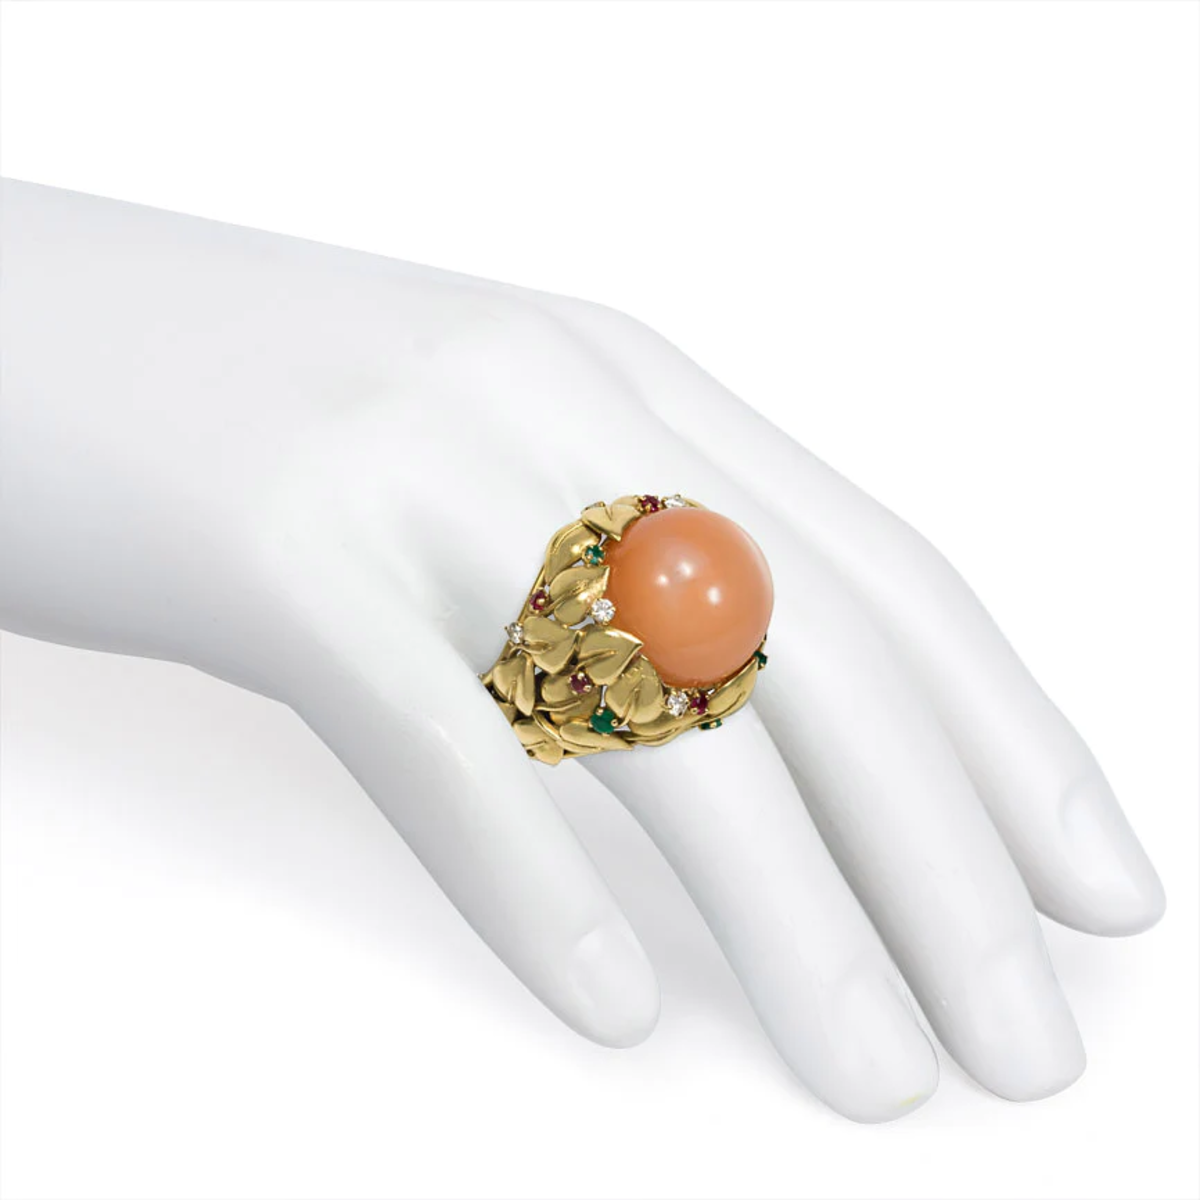 1950s 18KT Yellow Gold Moonstone, Diamond, Emerald & Ruby Cocktail Ring on finger